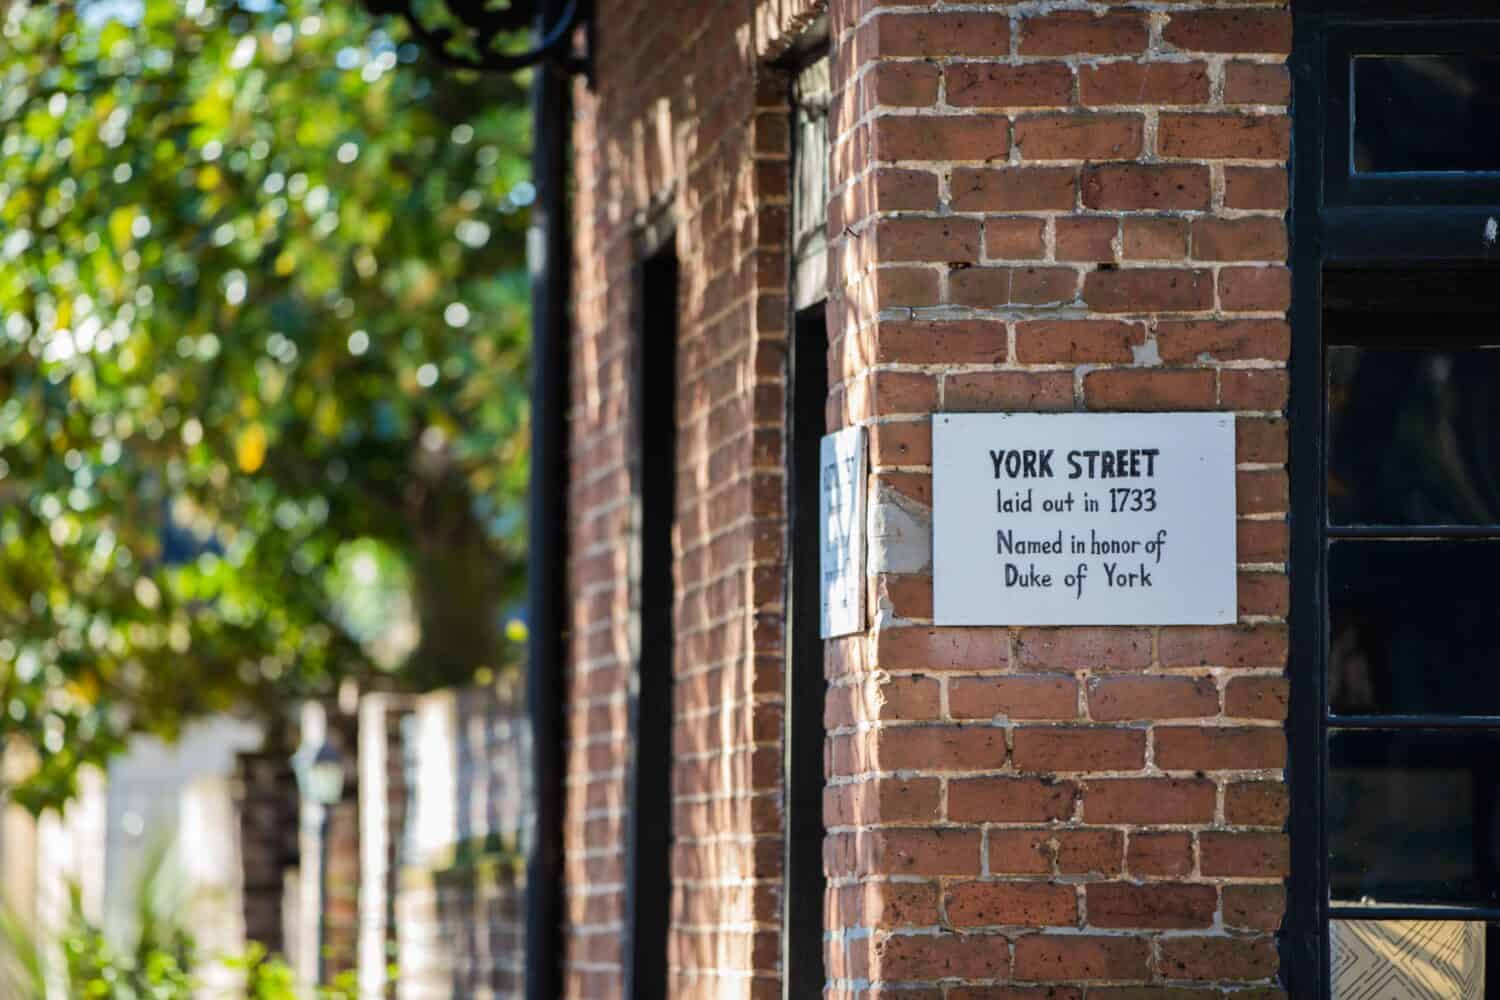 A street marker on the brick with York Street laid out in 1733 named in honor of Duke of York text